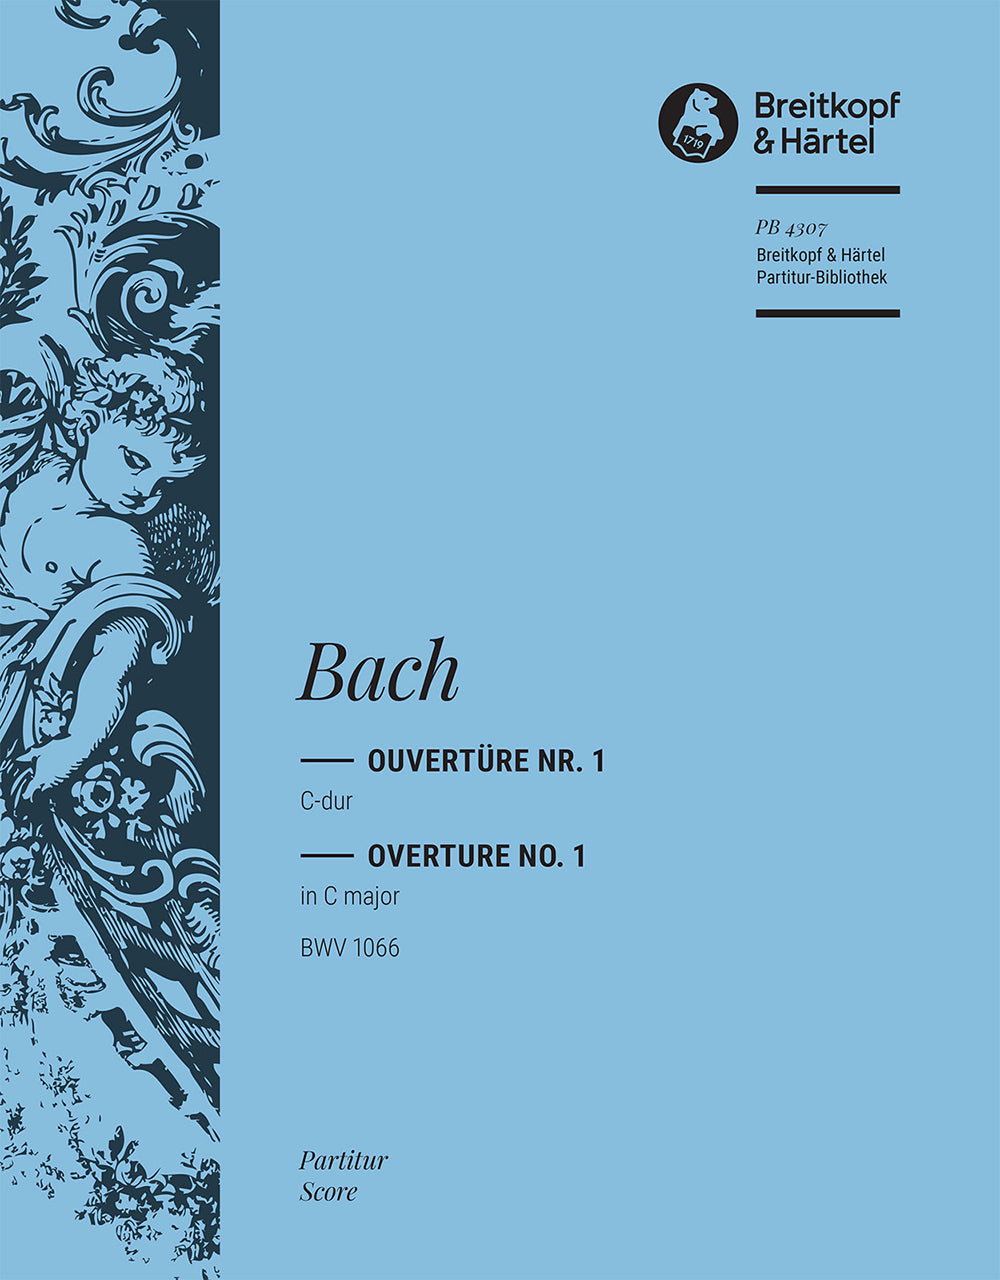 Bach Overture (Suite) No. 1 in C major BWV 1066